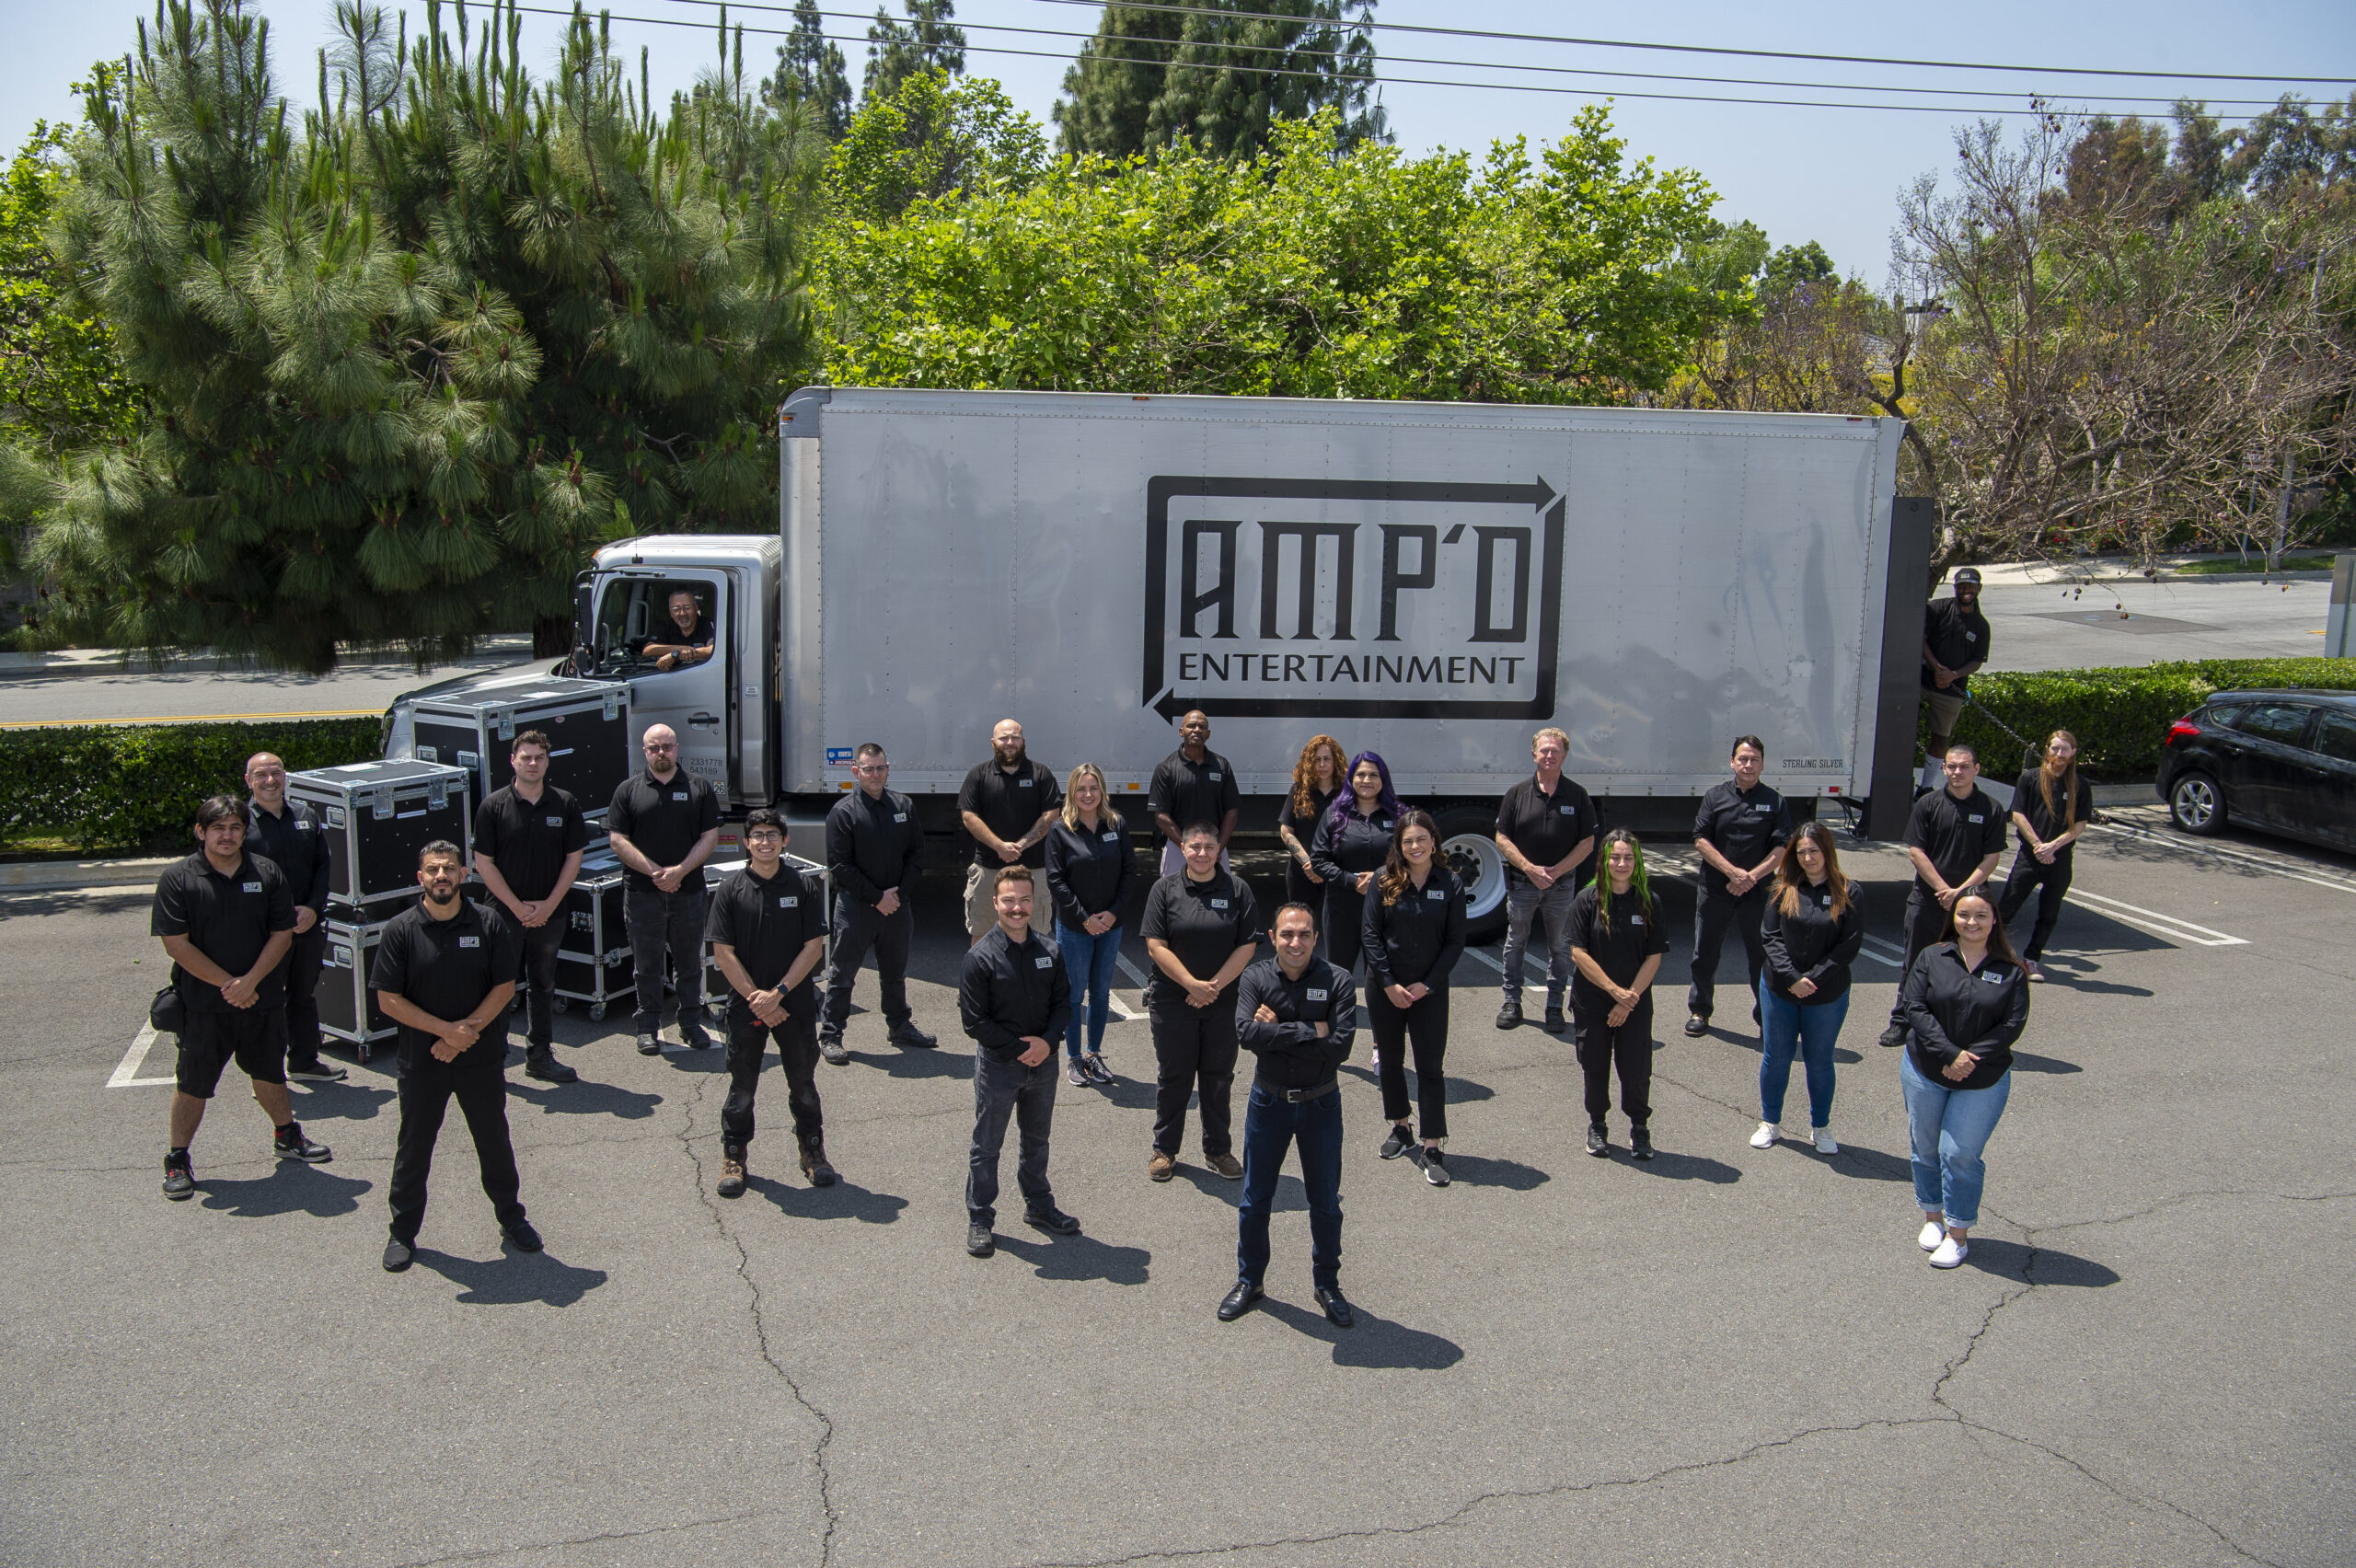 amp'd entertainment crew in the parking lot in front of amp'd entertainment truck